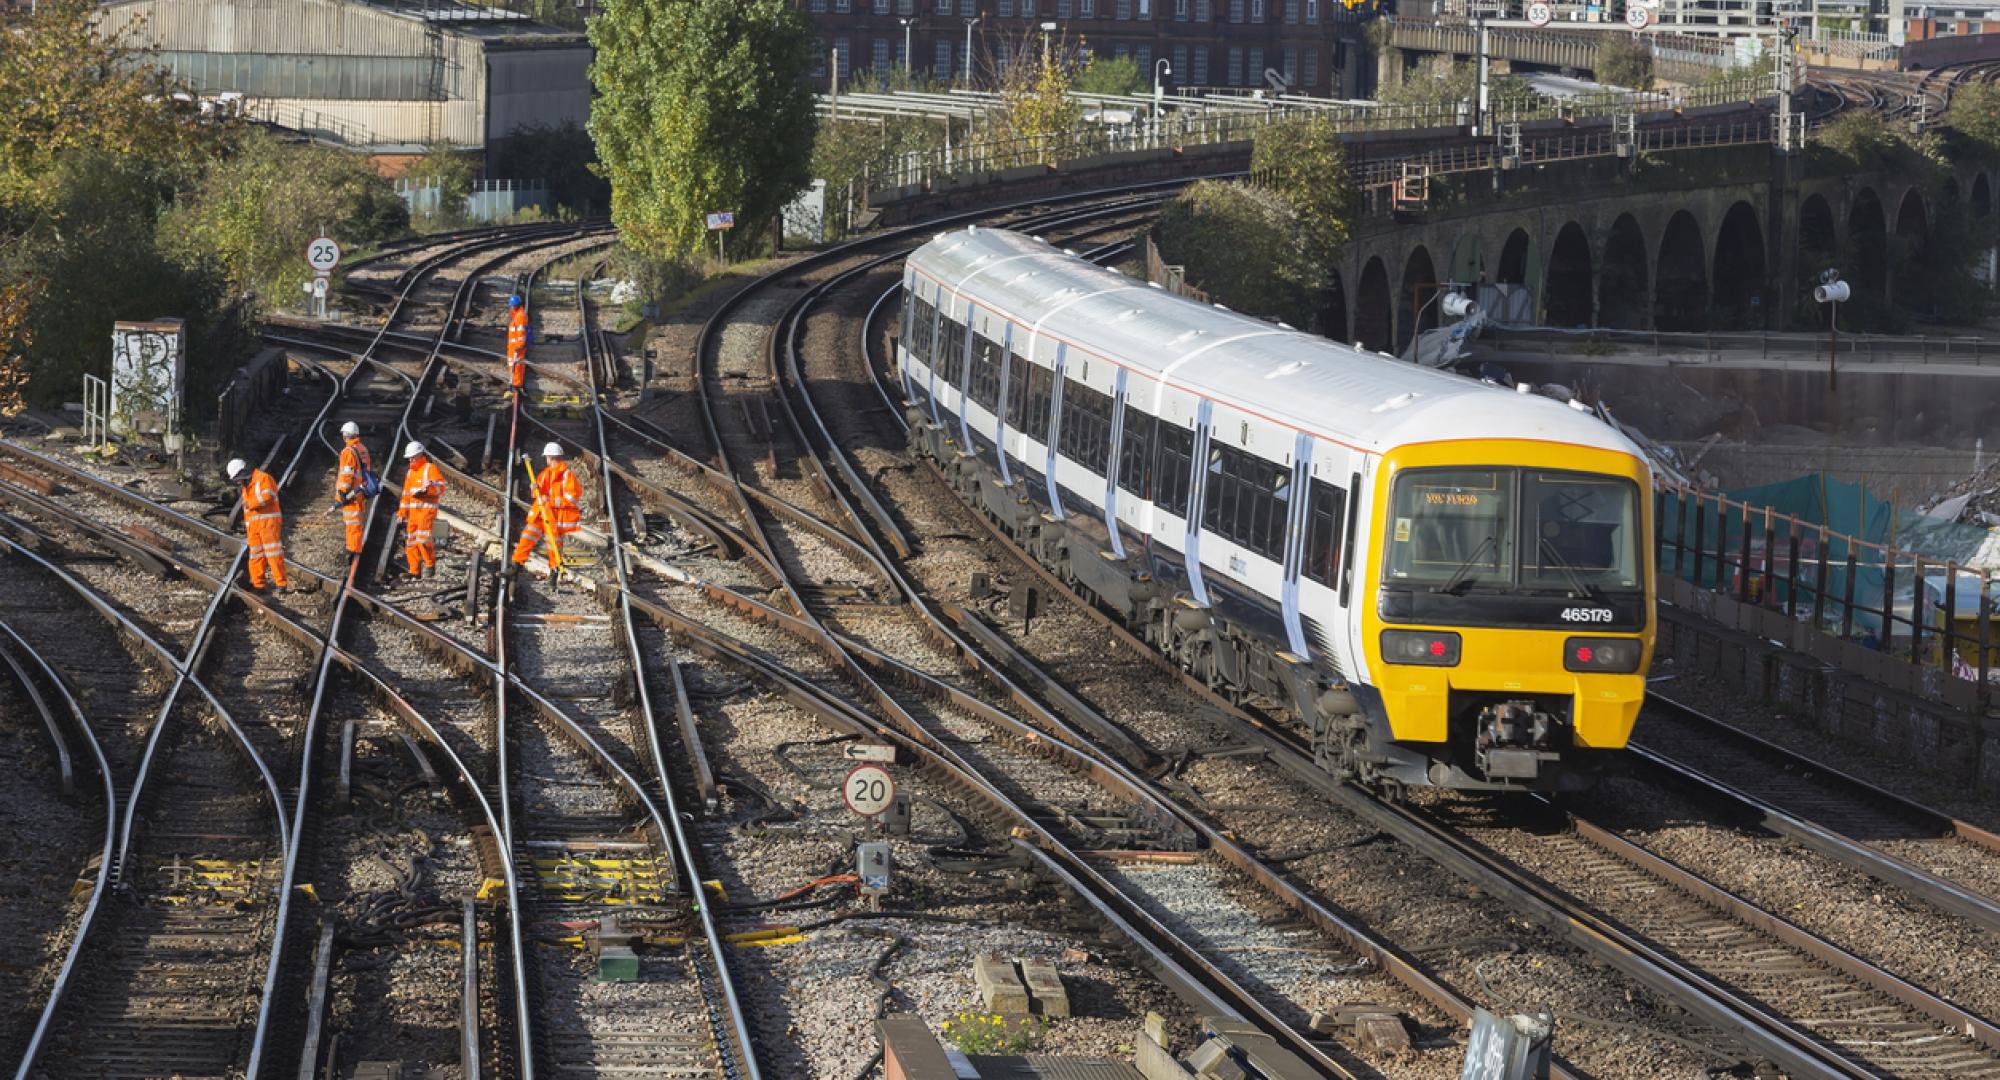 Network Rail required to clear structure examinations backlog